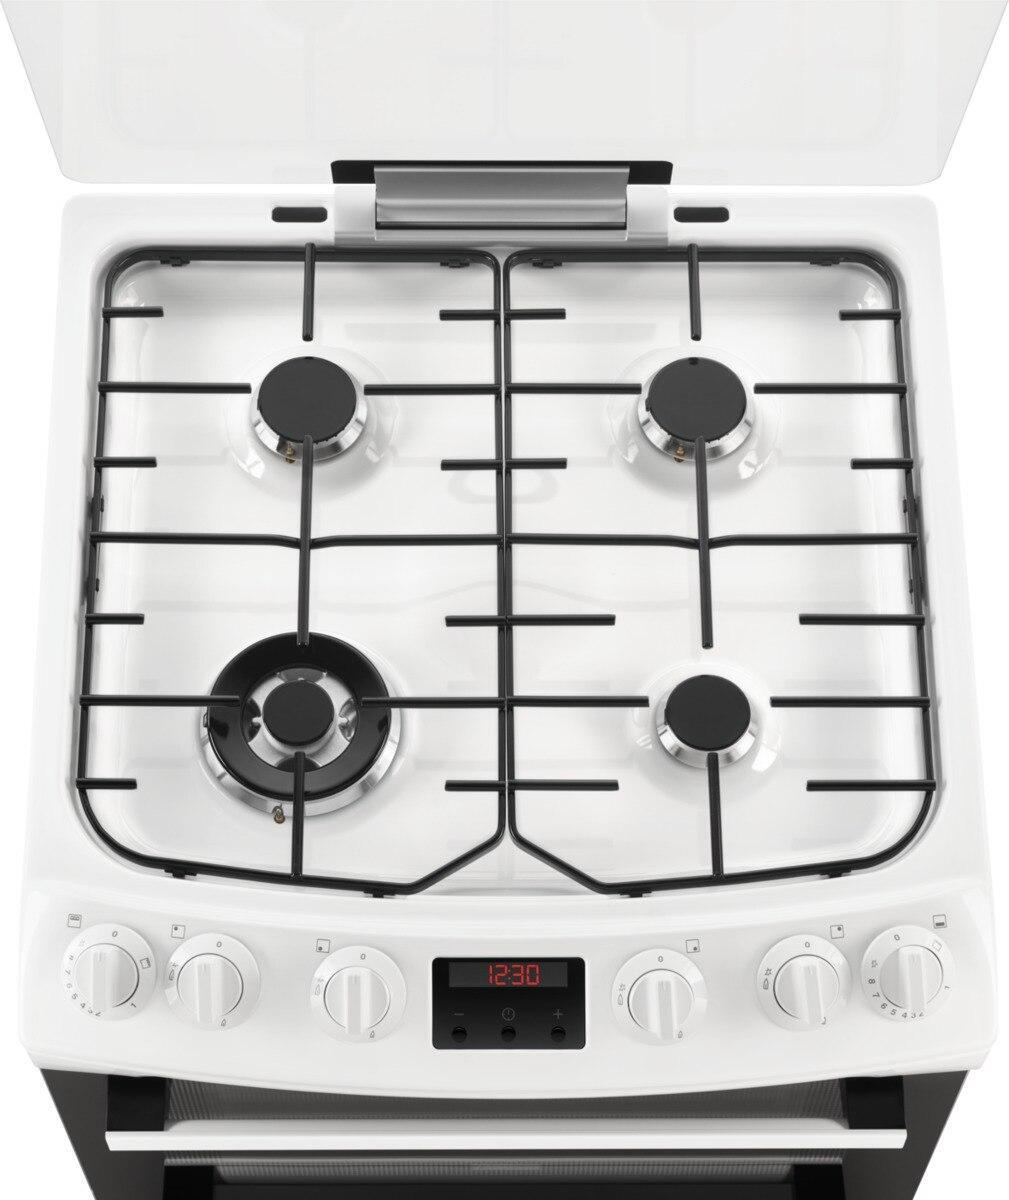 Zanussi ZCG63260WE 60cm Double Oven Gas Cooker with Electric Grill - White - Atlantic Electrics